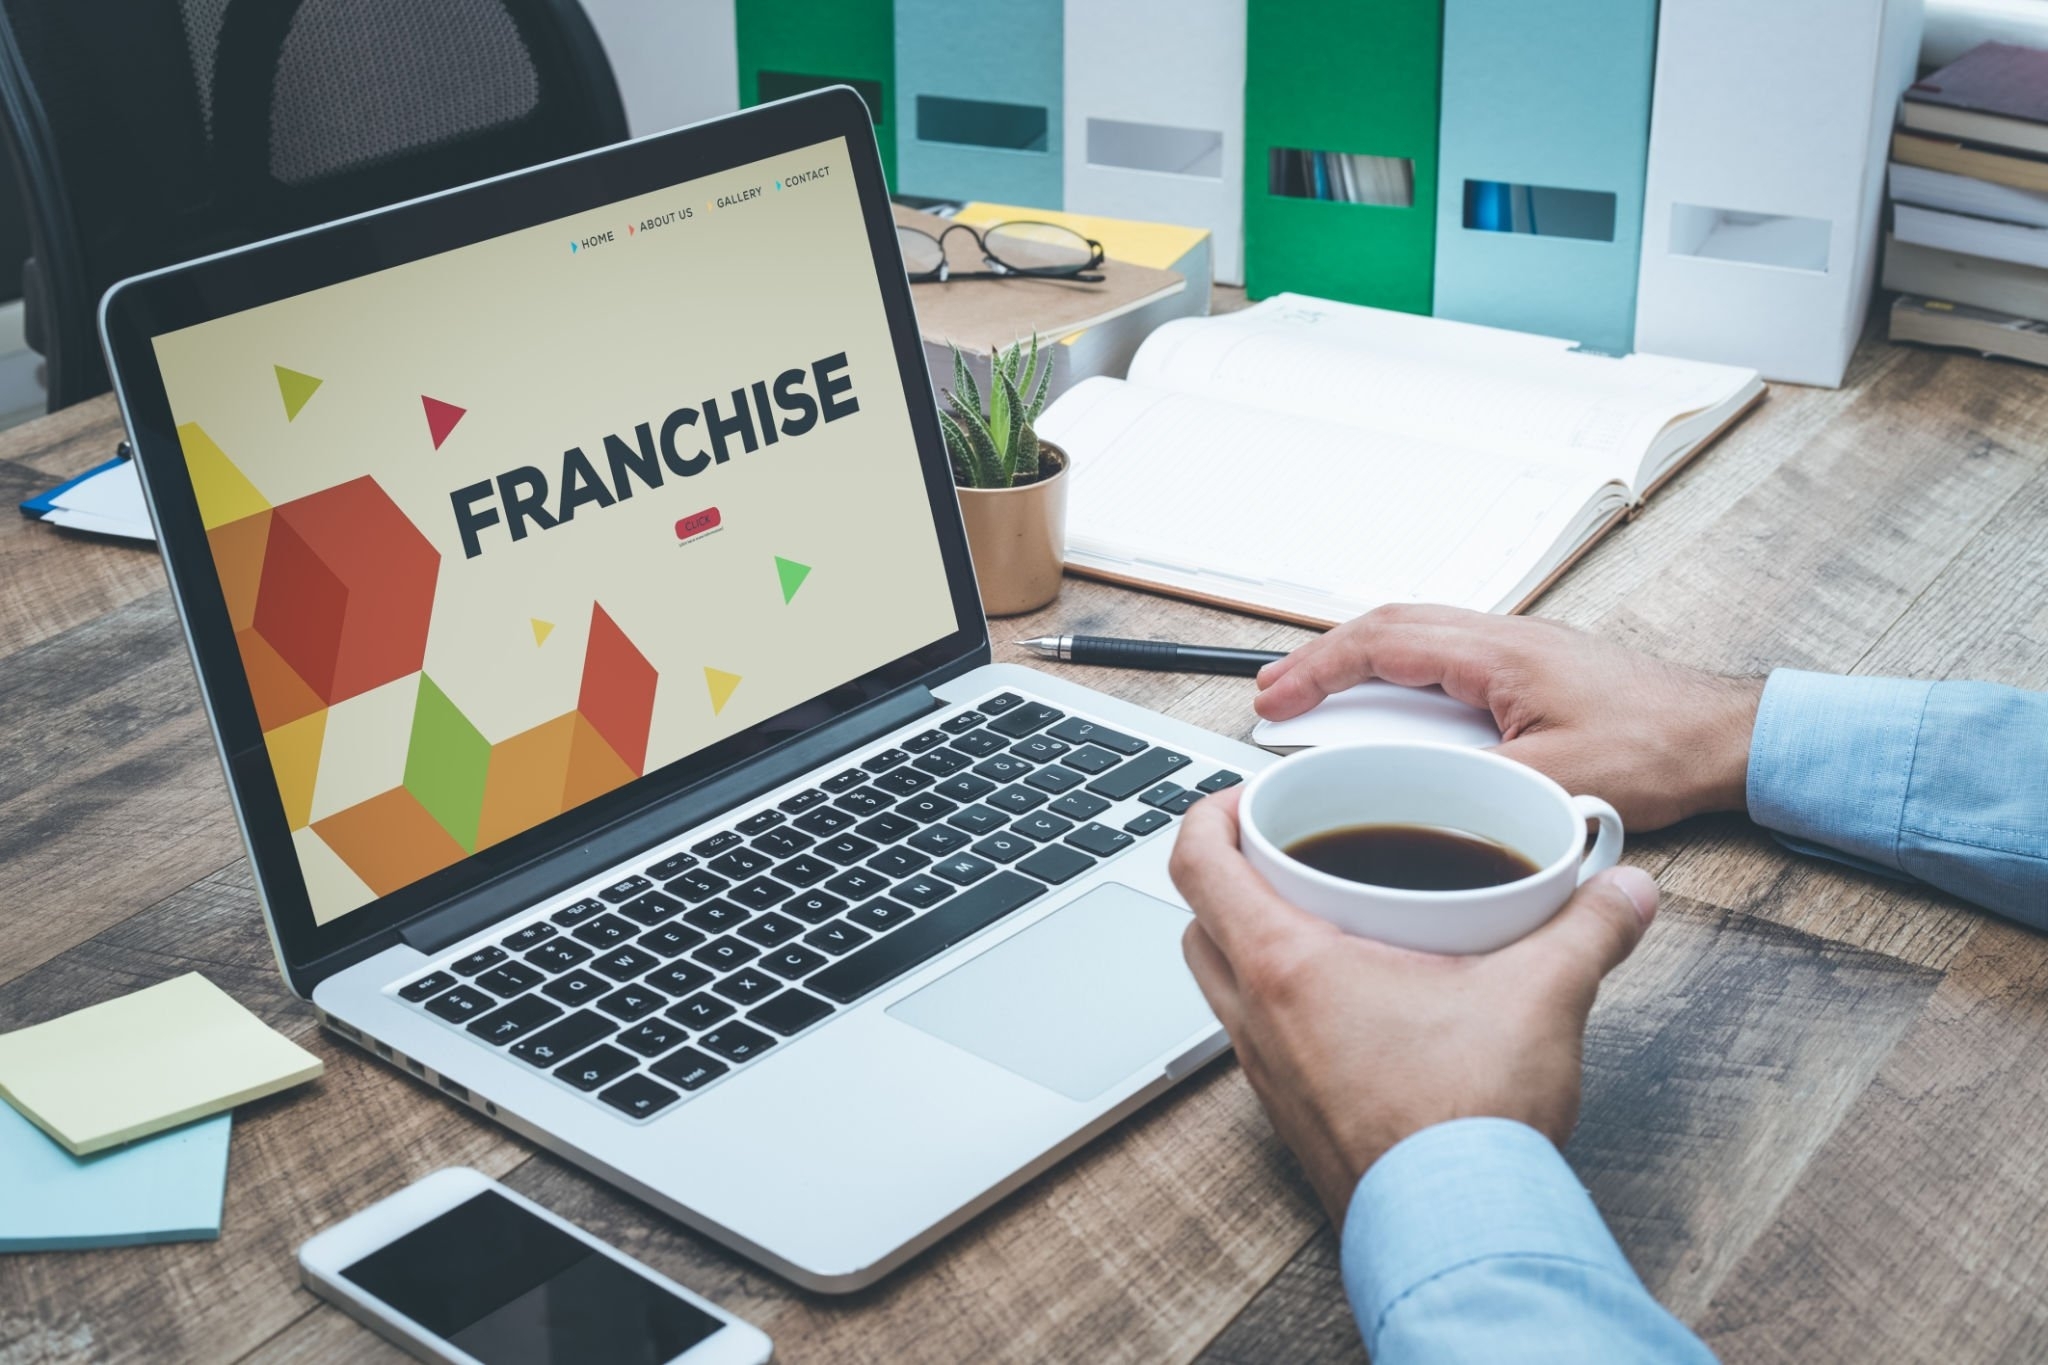 Franchising Path | Did You Know Franchising Is A Legit Side Hustle?